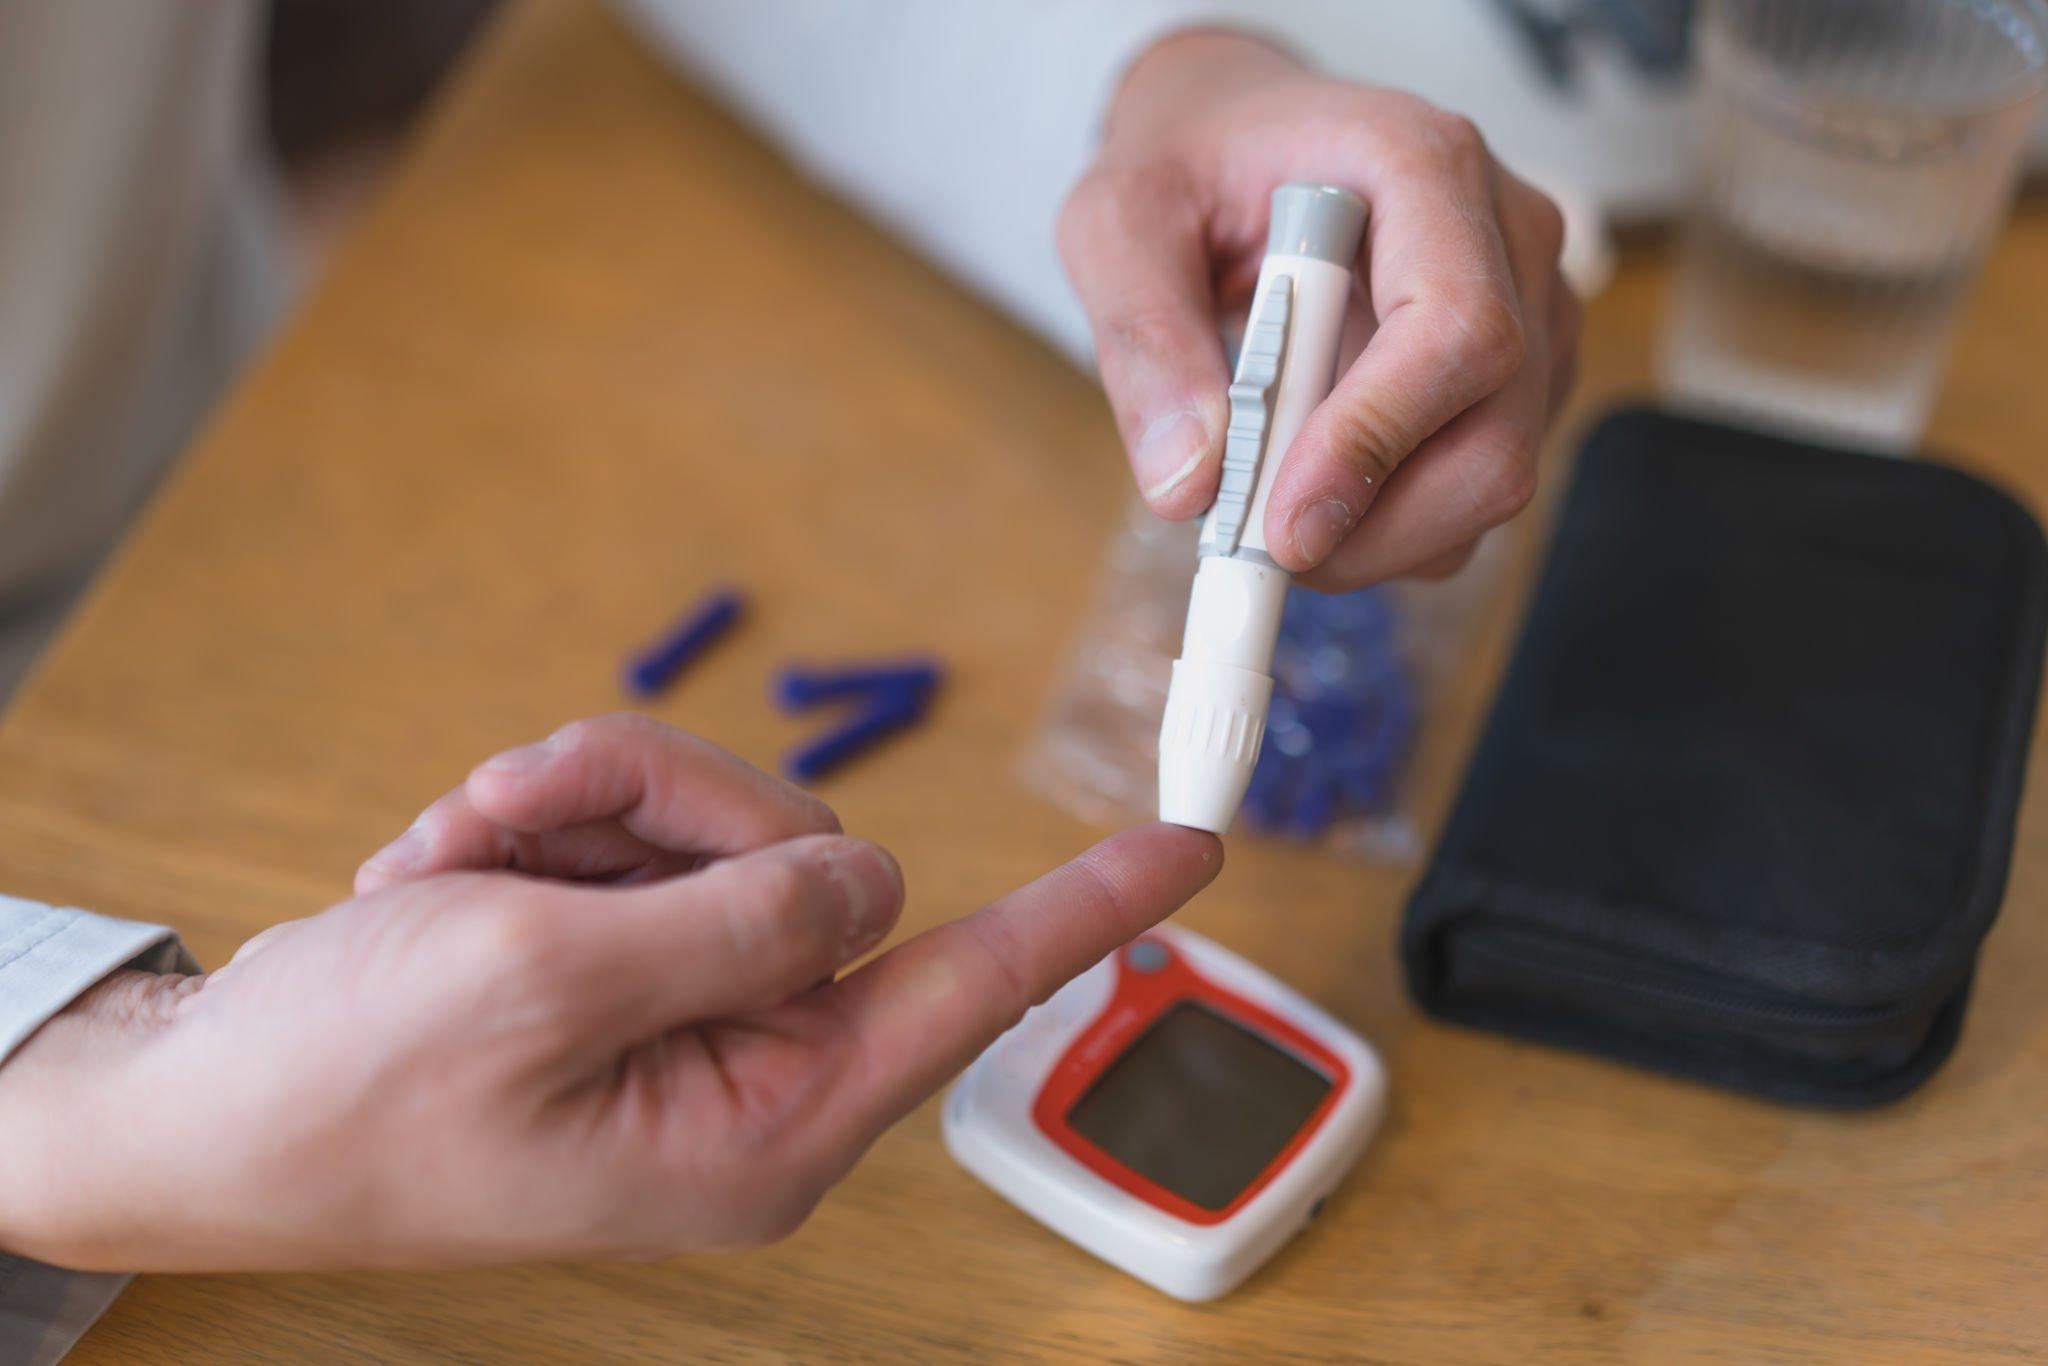 A person pricking their finger to perform a blood test, specifically a random blood sugar test, for the diabetes diagnosis by measuring blood sugar level.